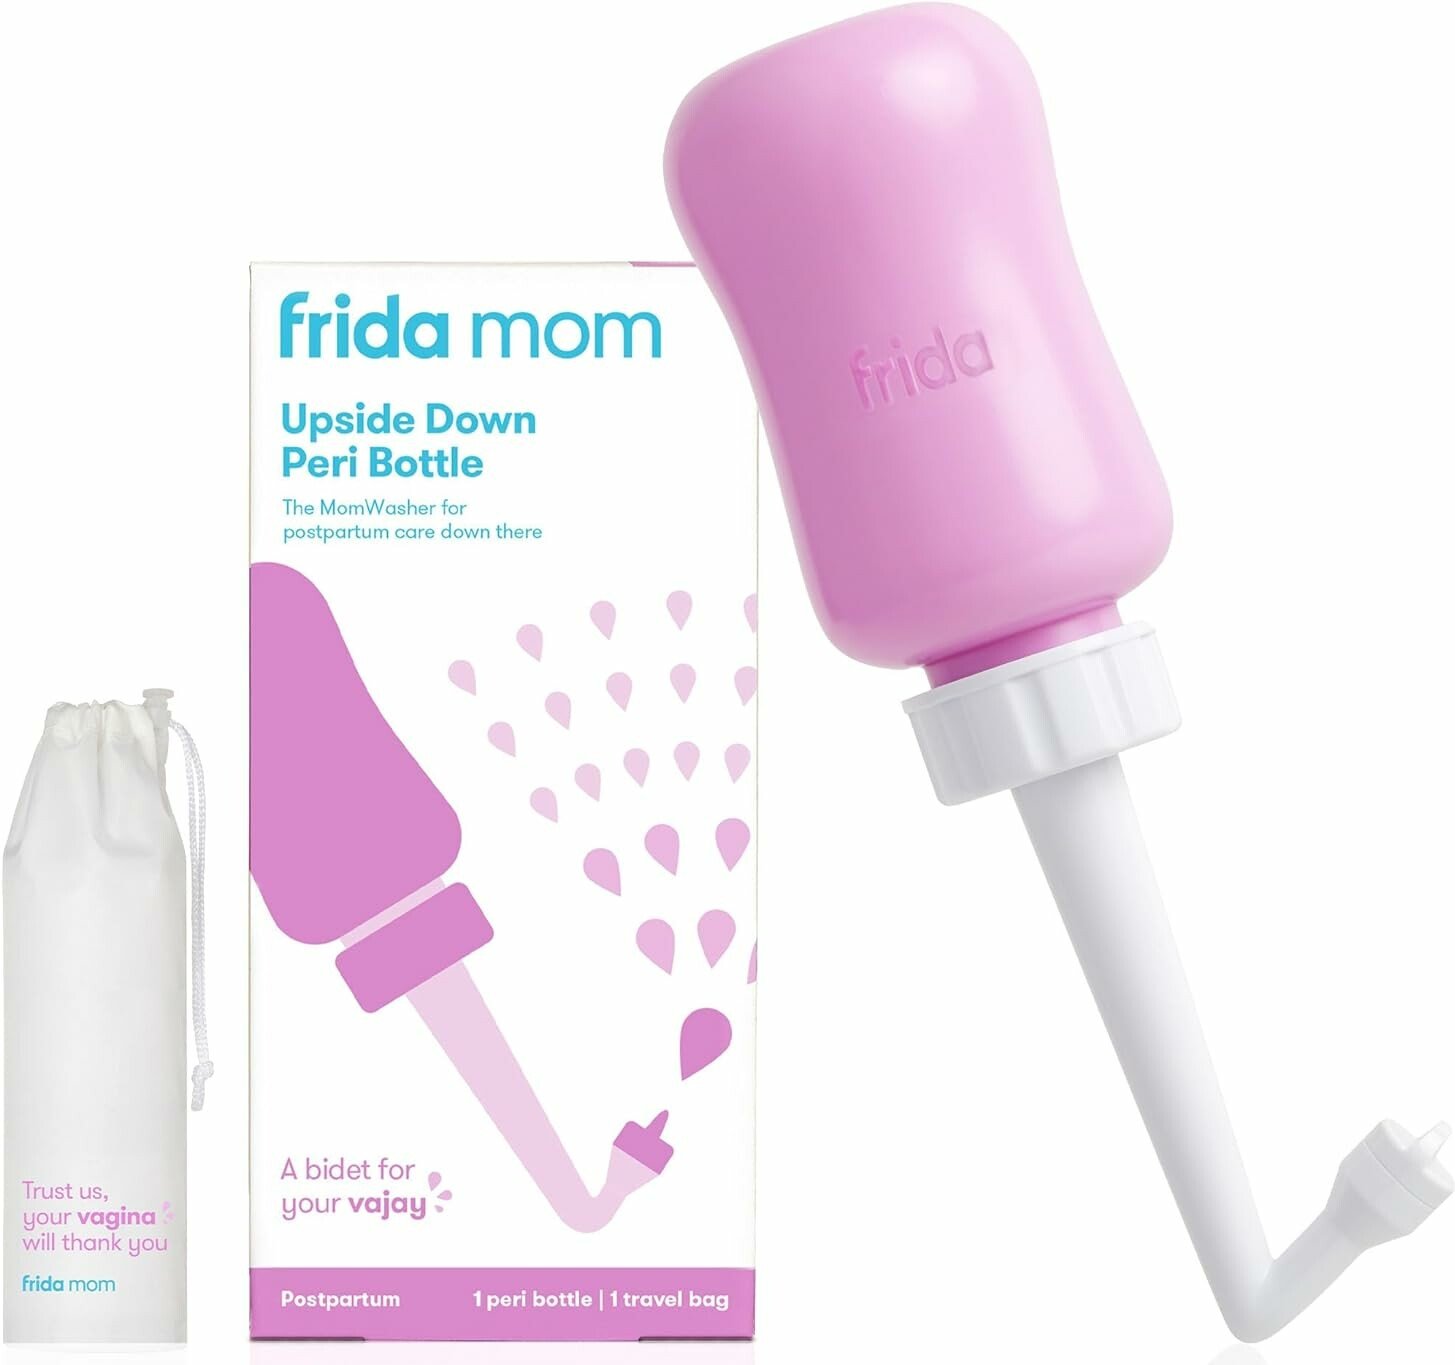 Frida Mom Upside Down Peri Bottle for Postpartum Care The Original Fridababy MomWasher for Perineal Recovery and Cleansing After Birth